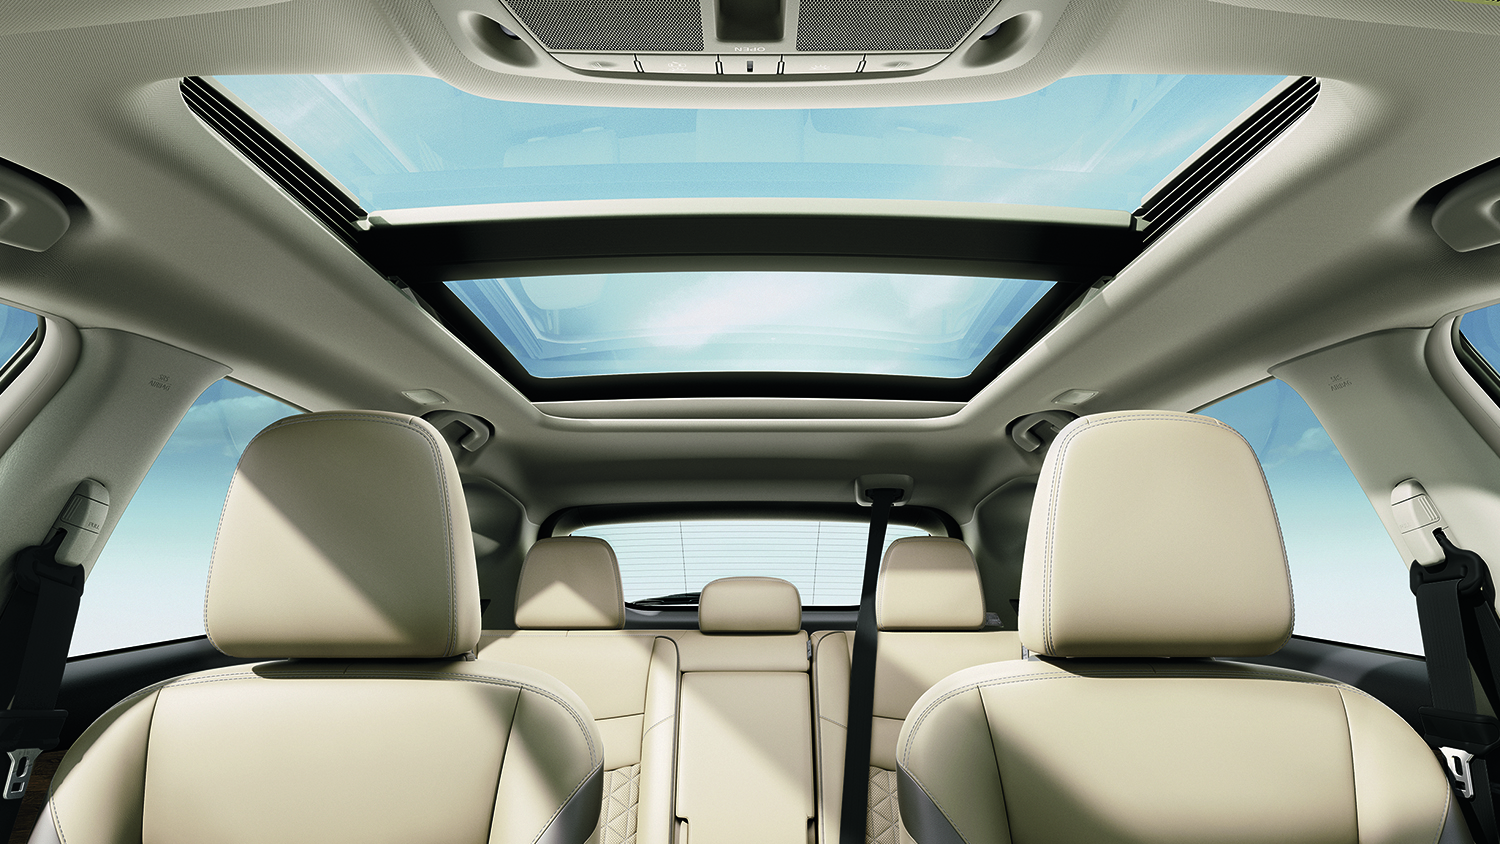 2023 nissan murano interior beige looking at sunroofs 